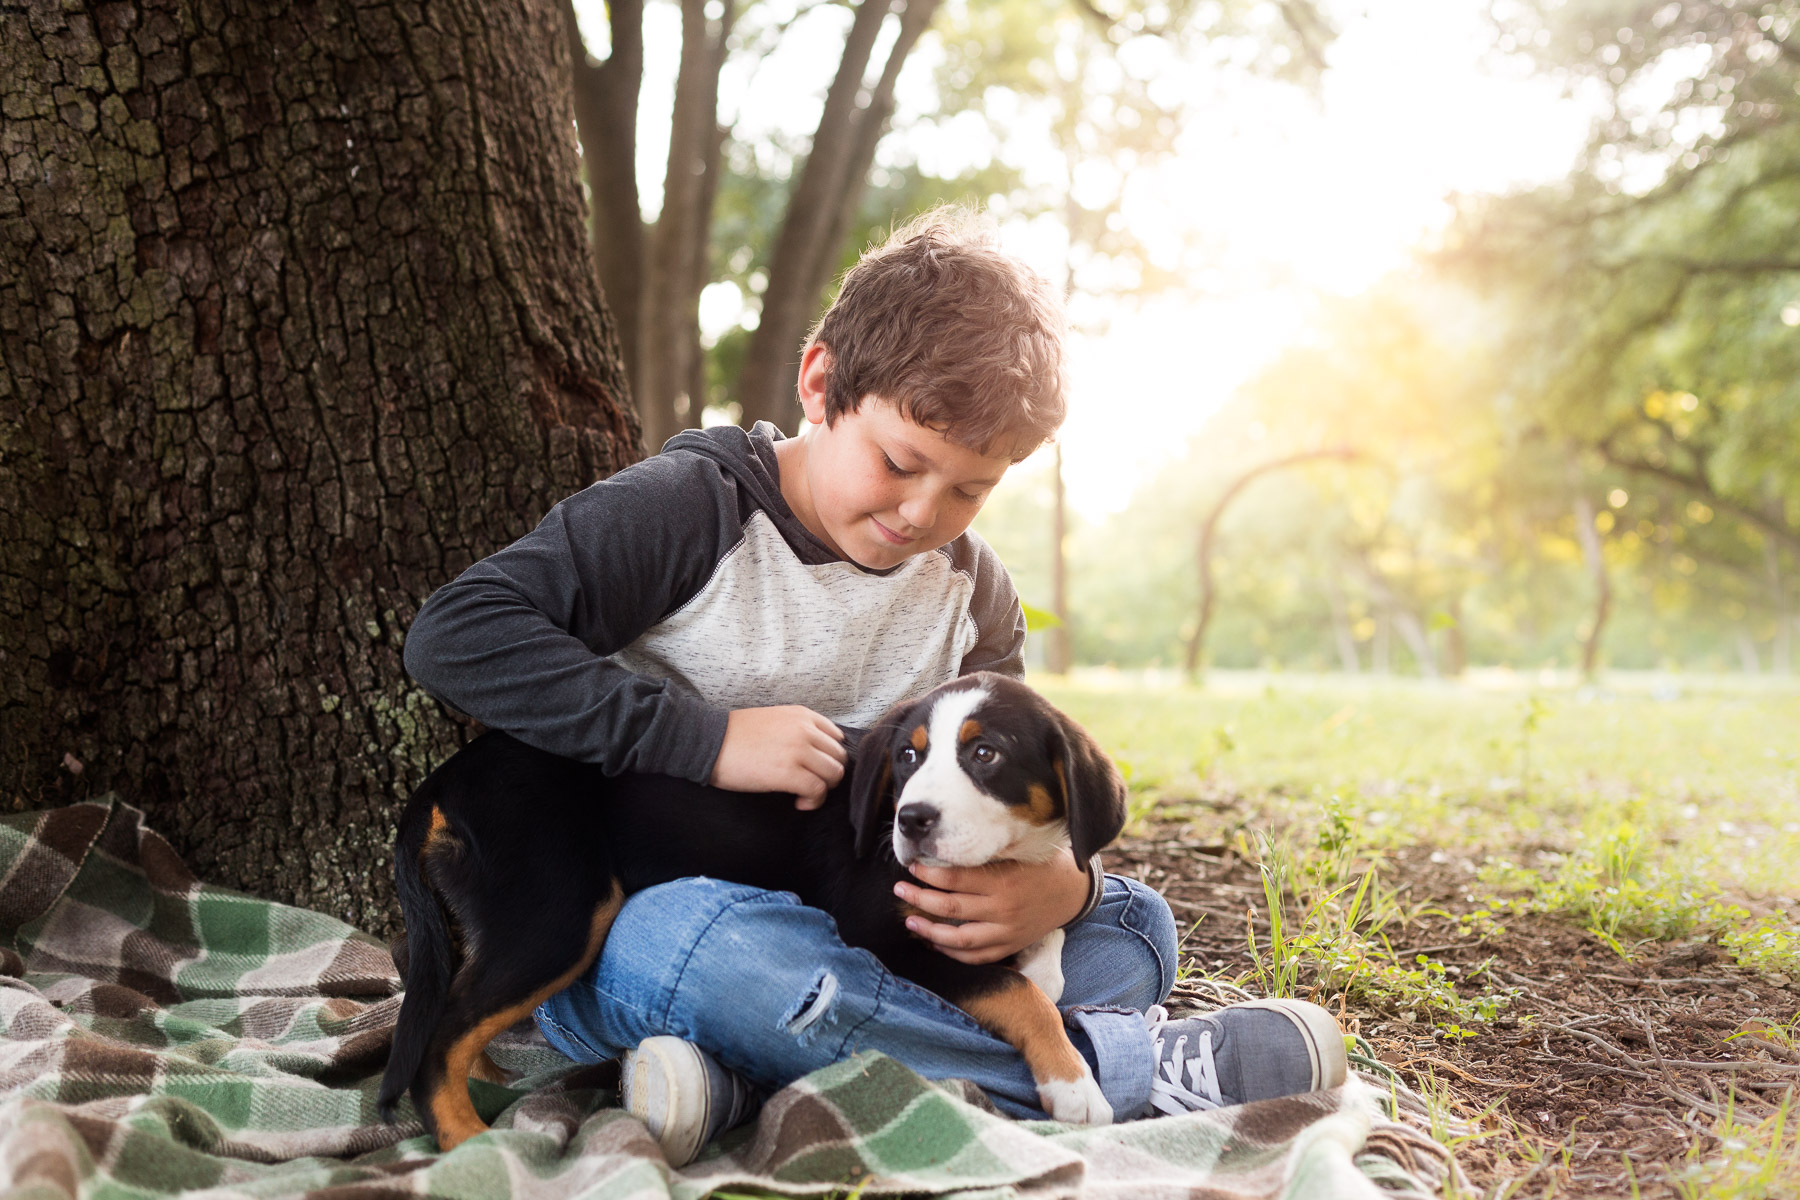 dog-swiss-bernese-puppu-with-boy-kid-together-forest-at-sunset.jpg